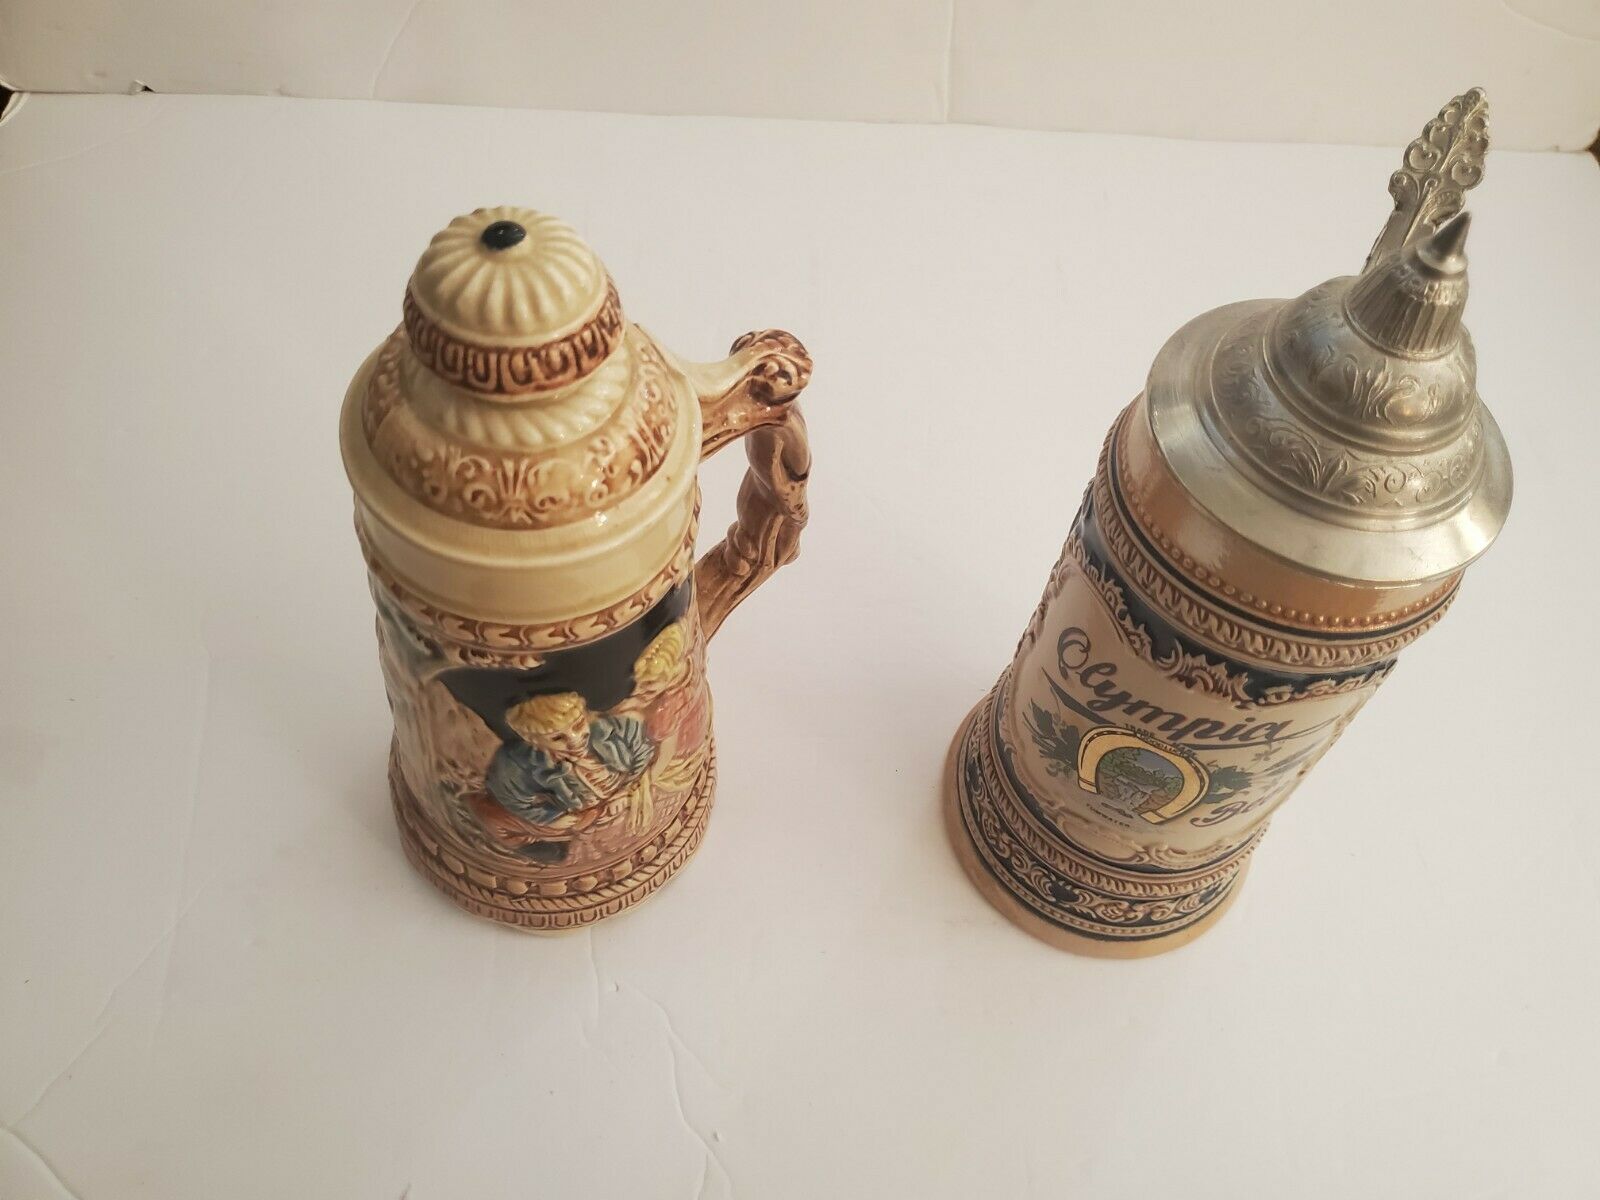 2 Steins Olympia Beer Lidded Stein And Music Box Stein